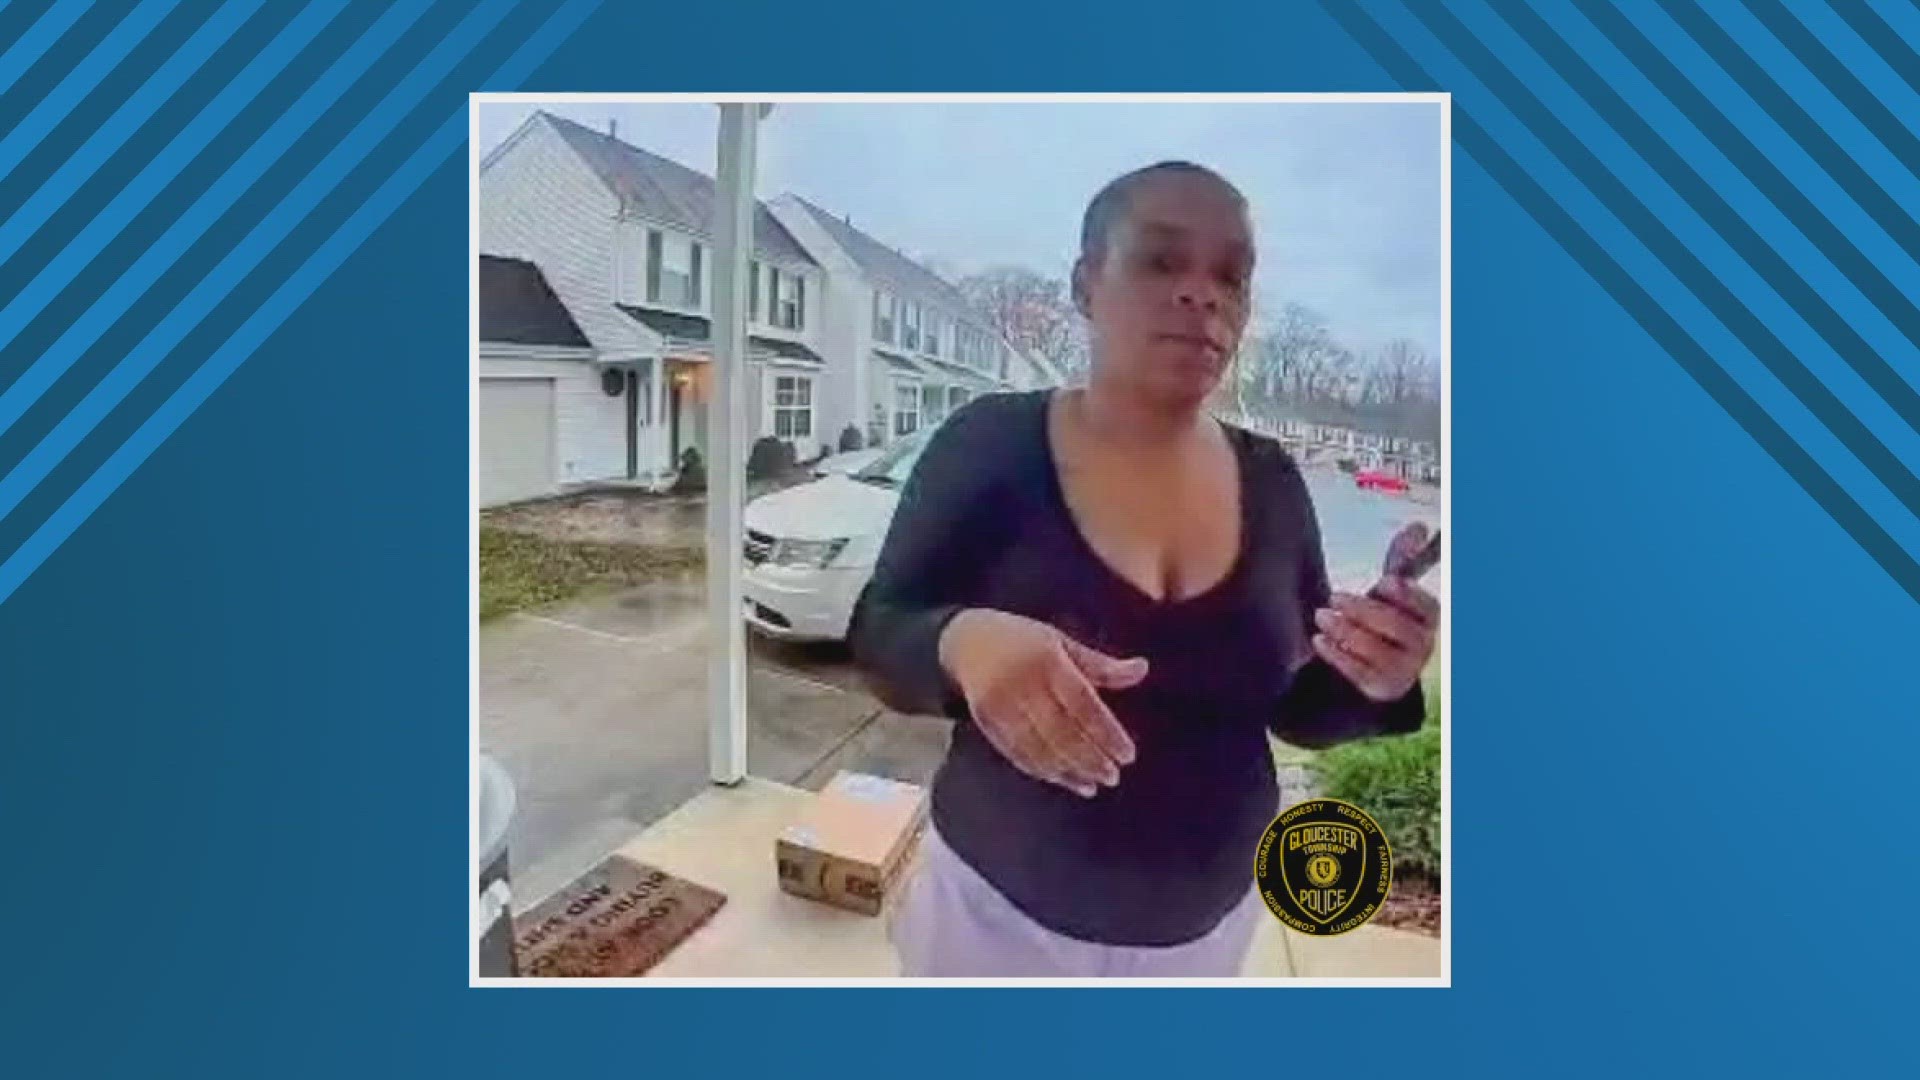 According to police in New Jersey, Ebony Gomez, 31, stole packages off of porches for two days. When confronted by a homeowner, she said she was a delivery driver.